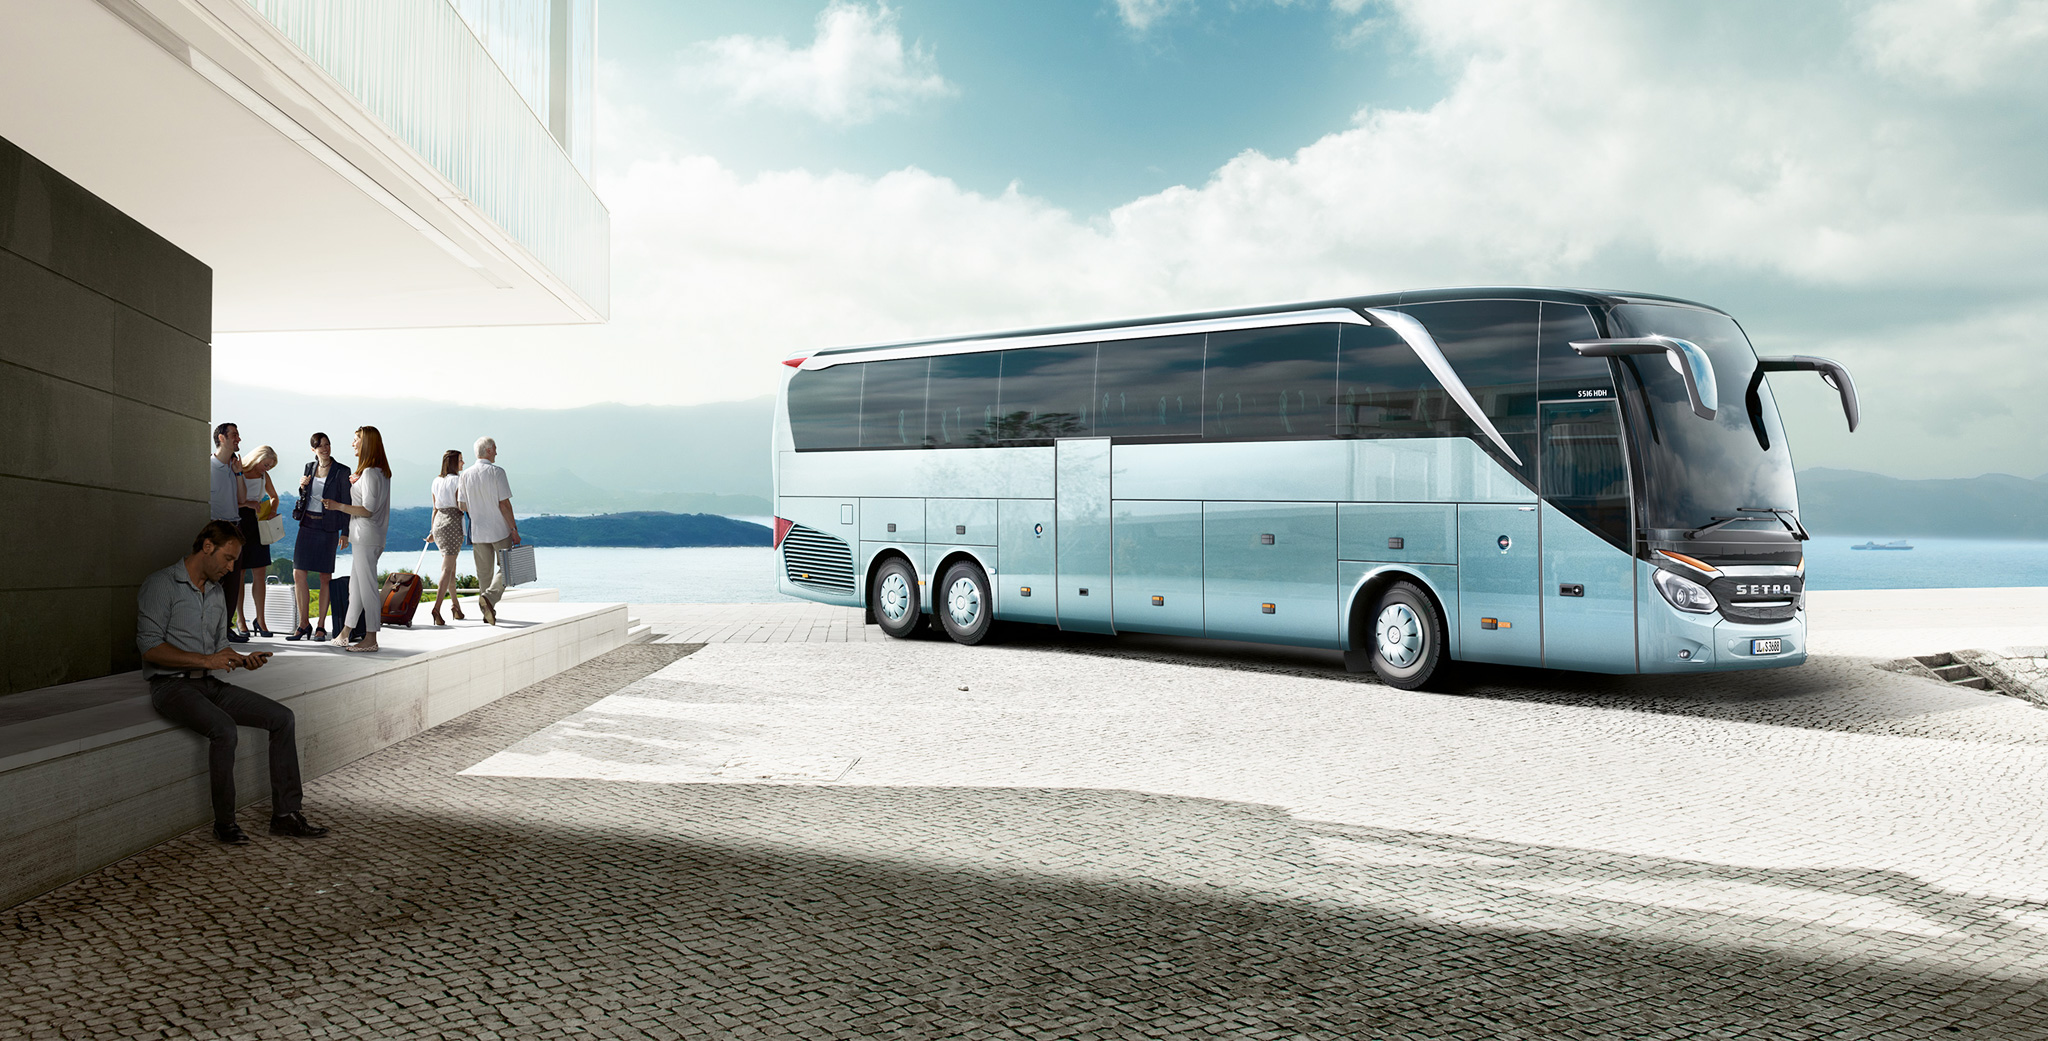 Bus and Coach Hire